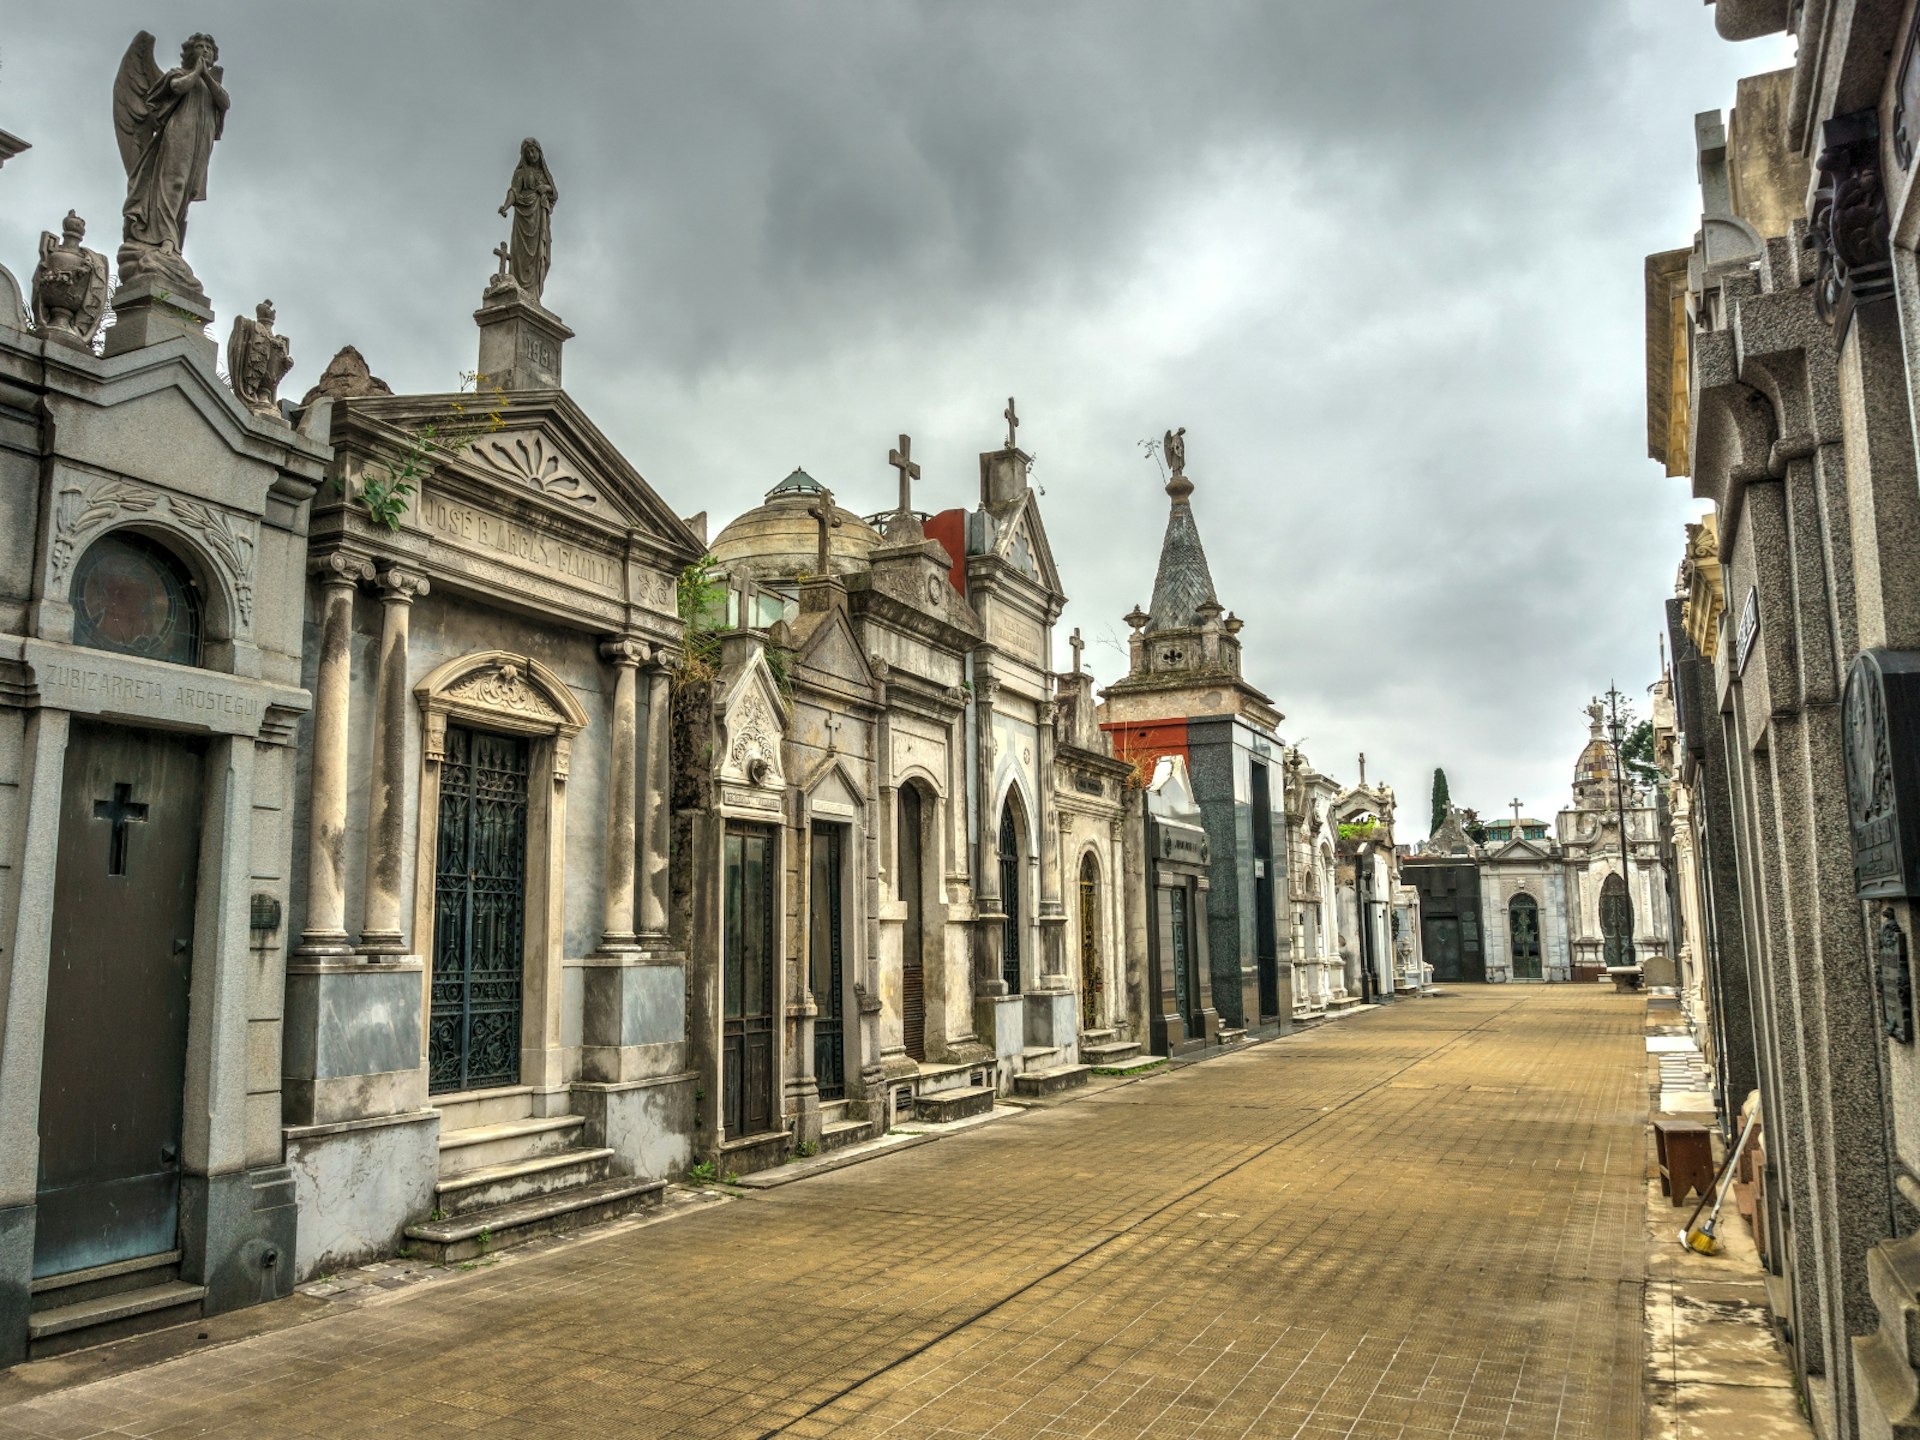 Looking down an avenue of mausoleums and graves at La Recoleta Cemetery